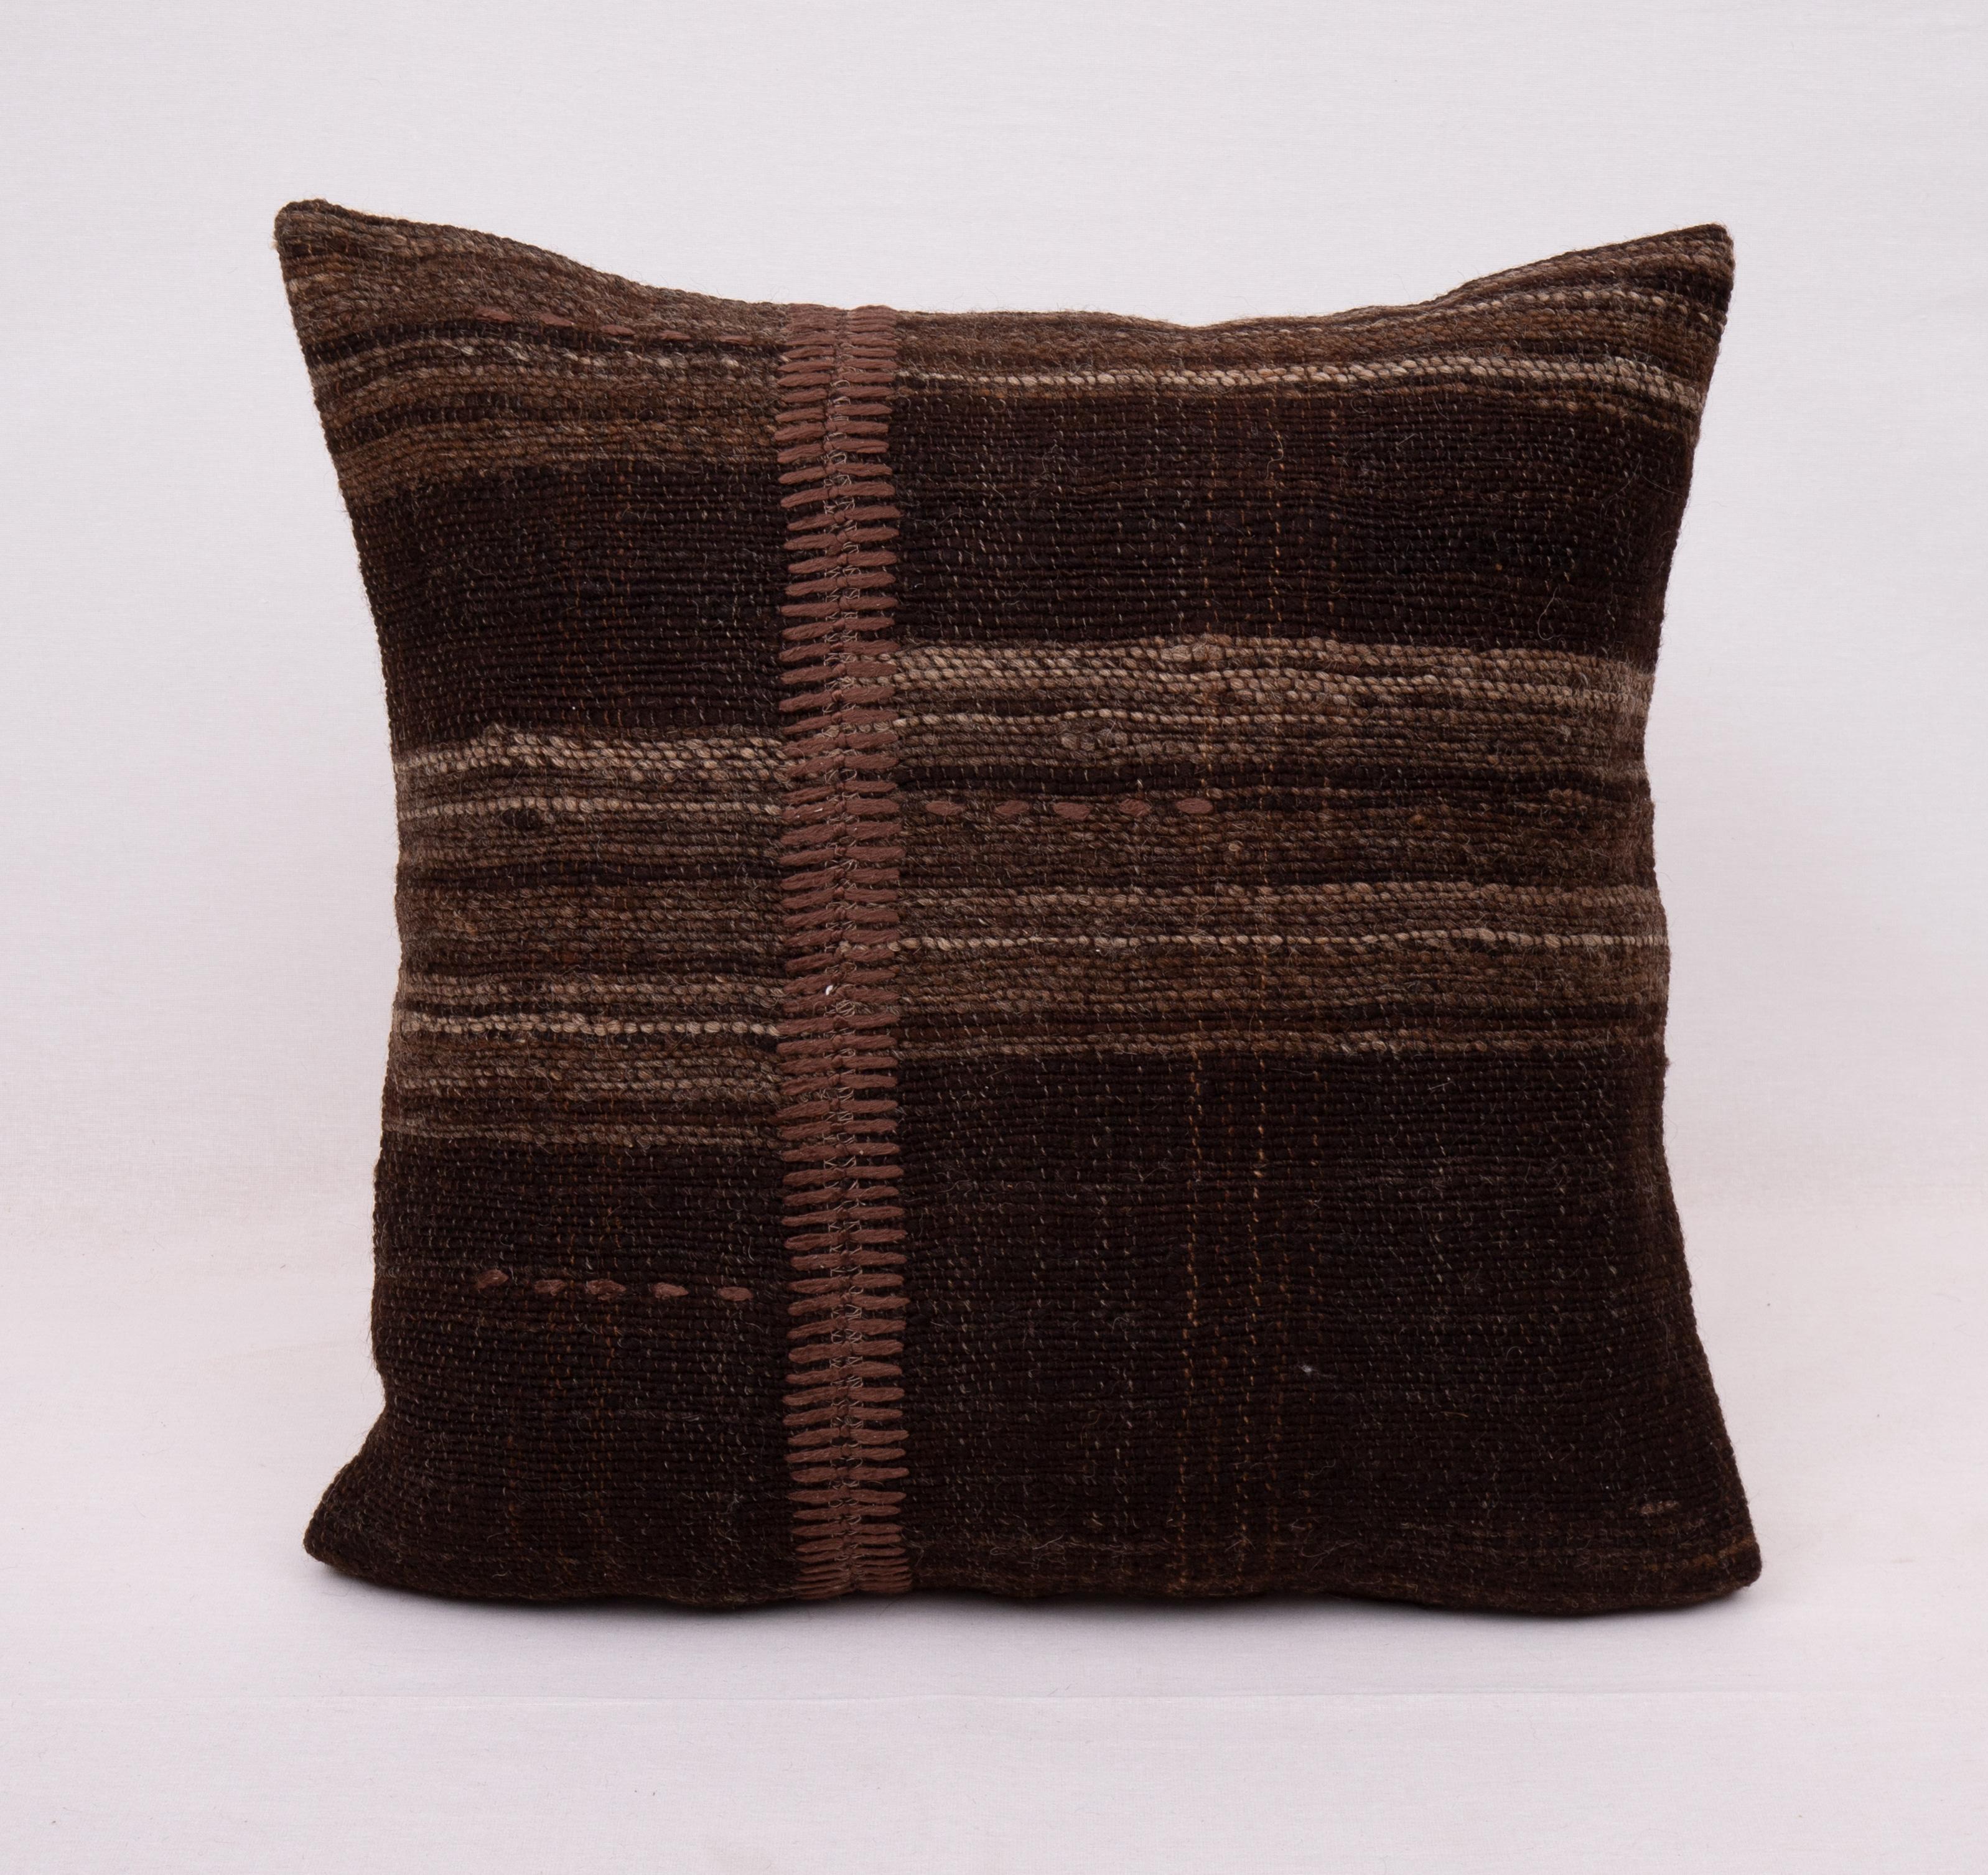 Rustic pillow case made from a vintage Un-Dyed wool coverlet, Mid 20th C


This pillow is made from a vintage coverlet that is hand woven using un-dyed wool. Our addition to the piece is silk hand stitching. It does not come with an insert. Linen